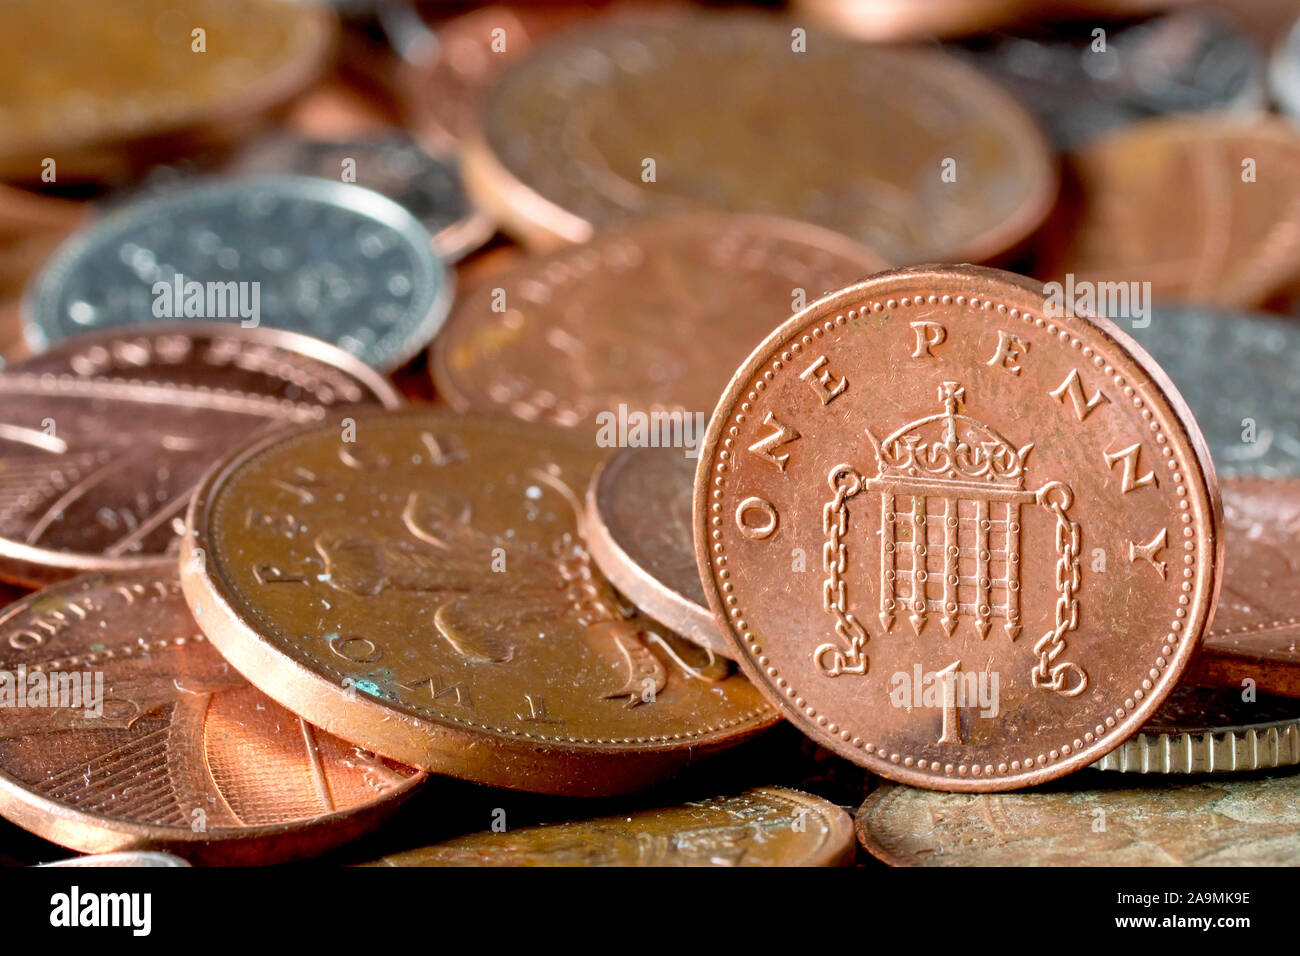 A close up selection of the lowest denomination coins in circulation in the UK, focusing on a single penny with low depth of field. Stock Photo